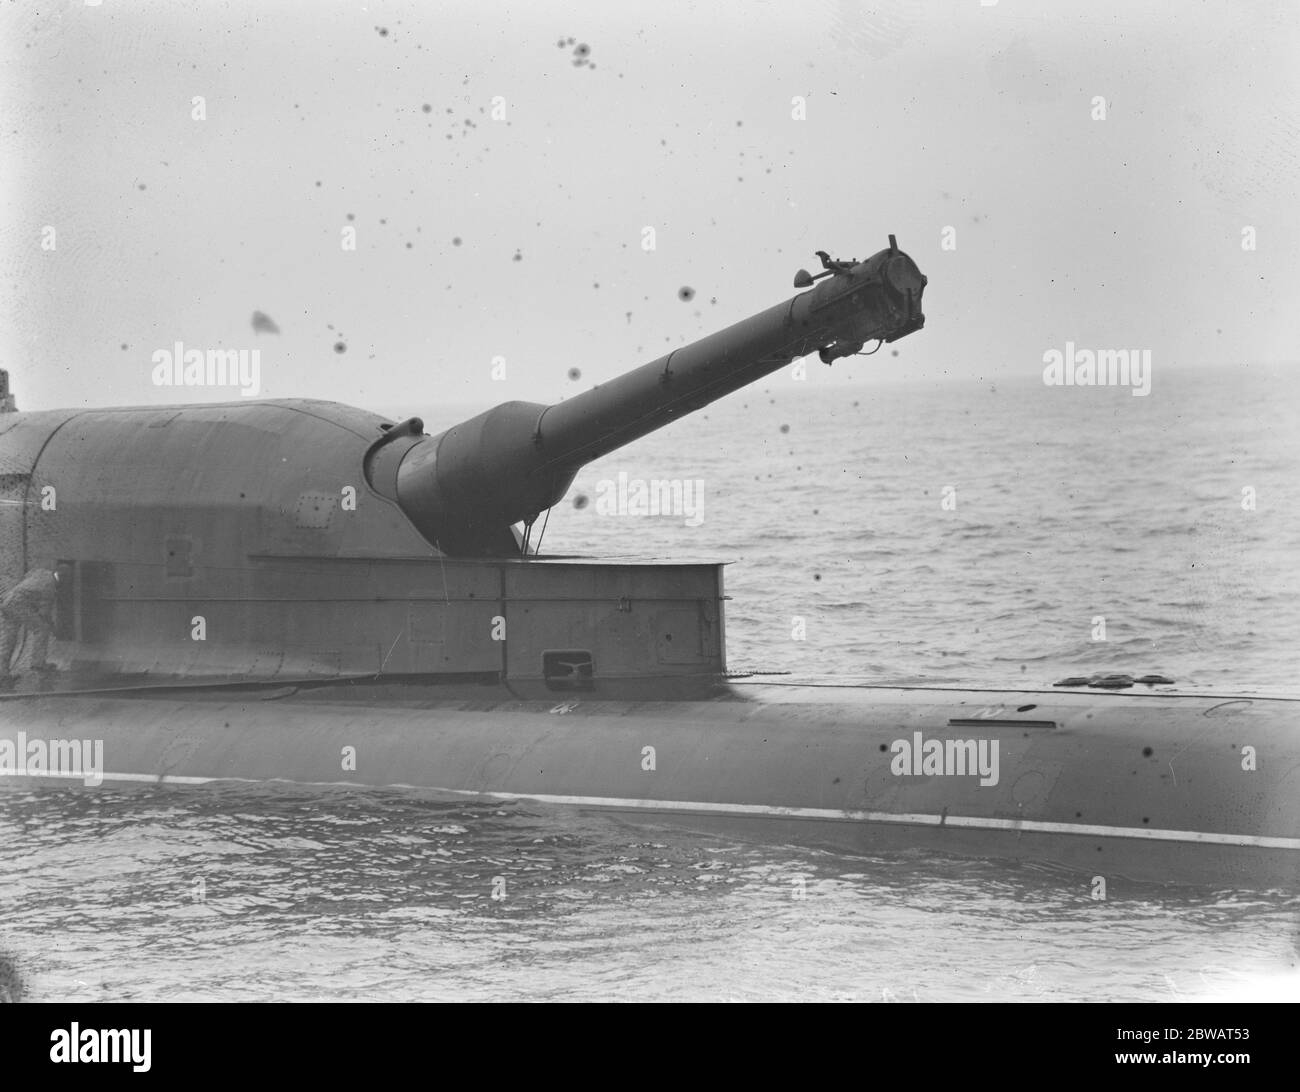 HMS Submarine No 3 During her sea trials in the North Sea . Her 12 inch gun is seen in the high angle position 30 March 1920 Stock Photo